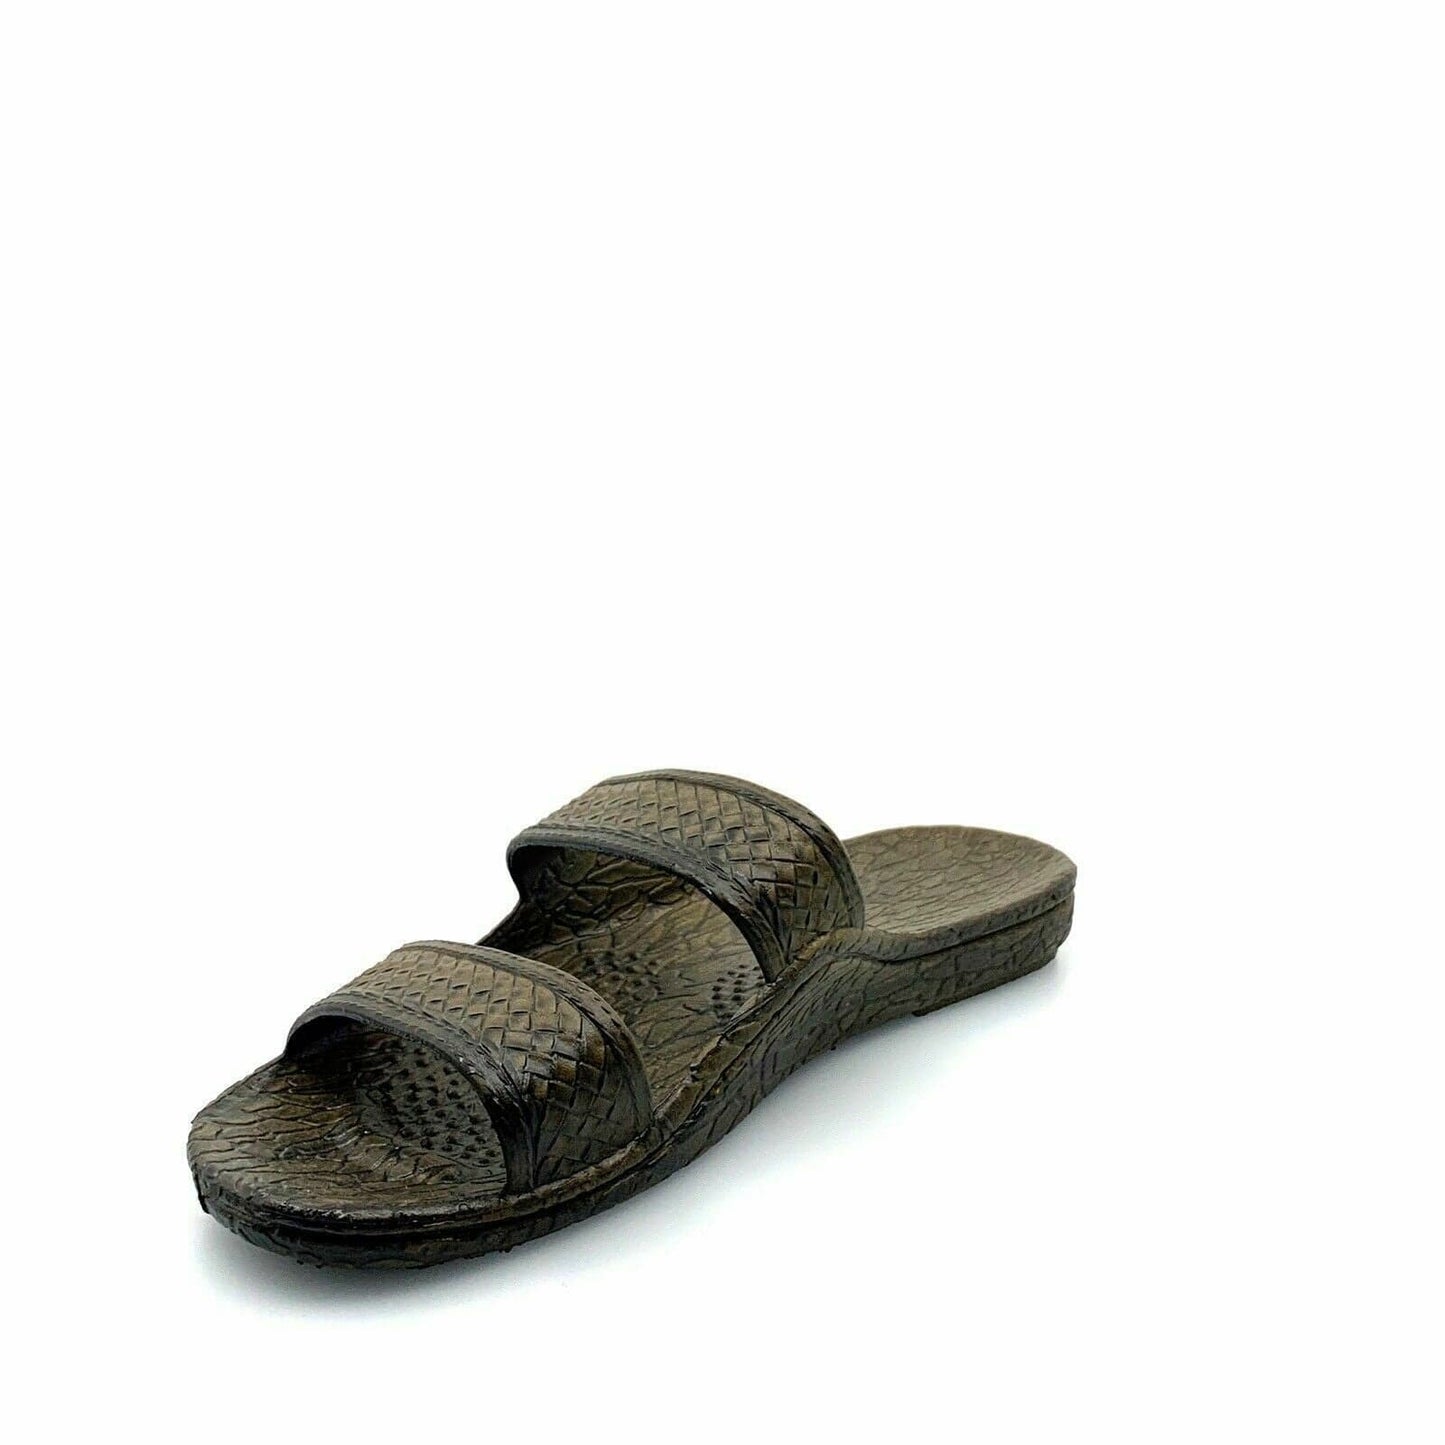 Pali Hawaii Size 13 Brown Rubber Sandals Classic Jandals Slides Shower Shoes